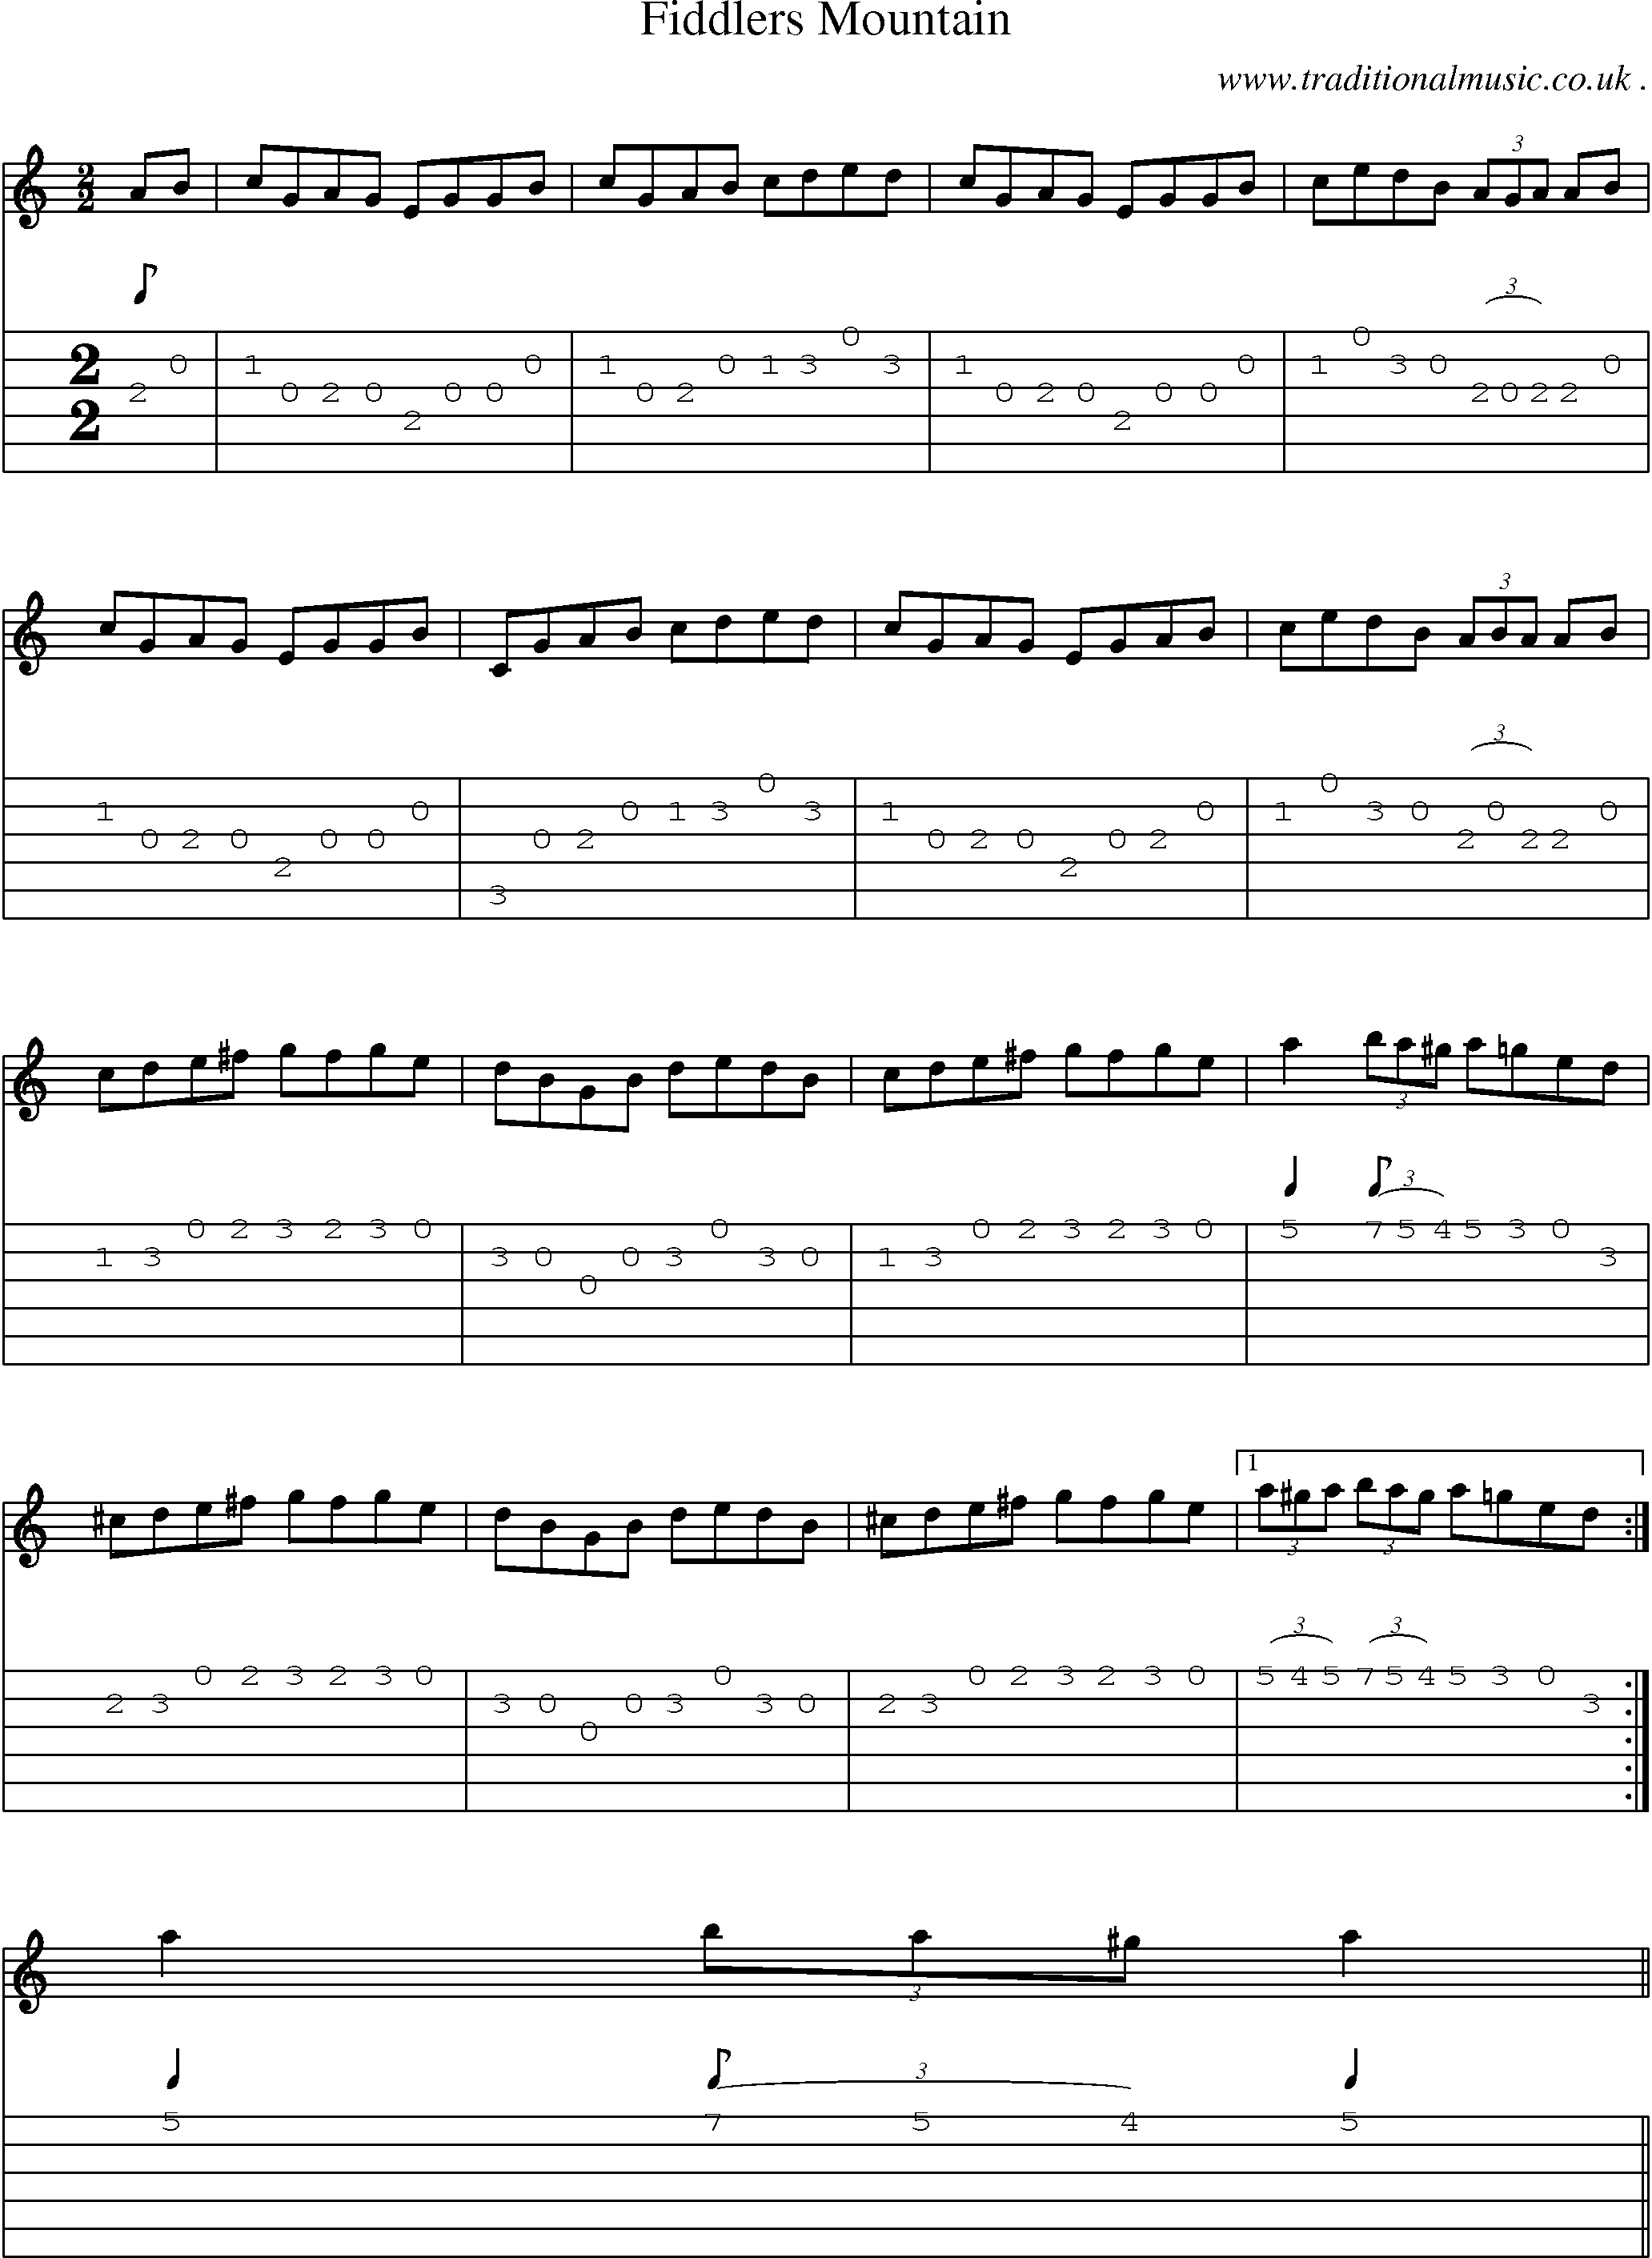 Sheet-Music and Guitar Tabs for Fiddlers Mountain